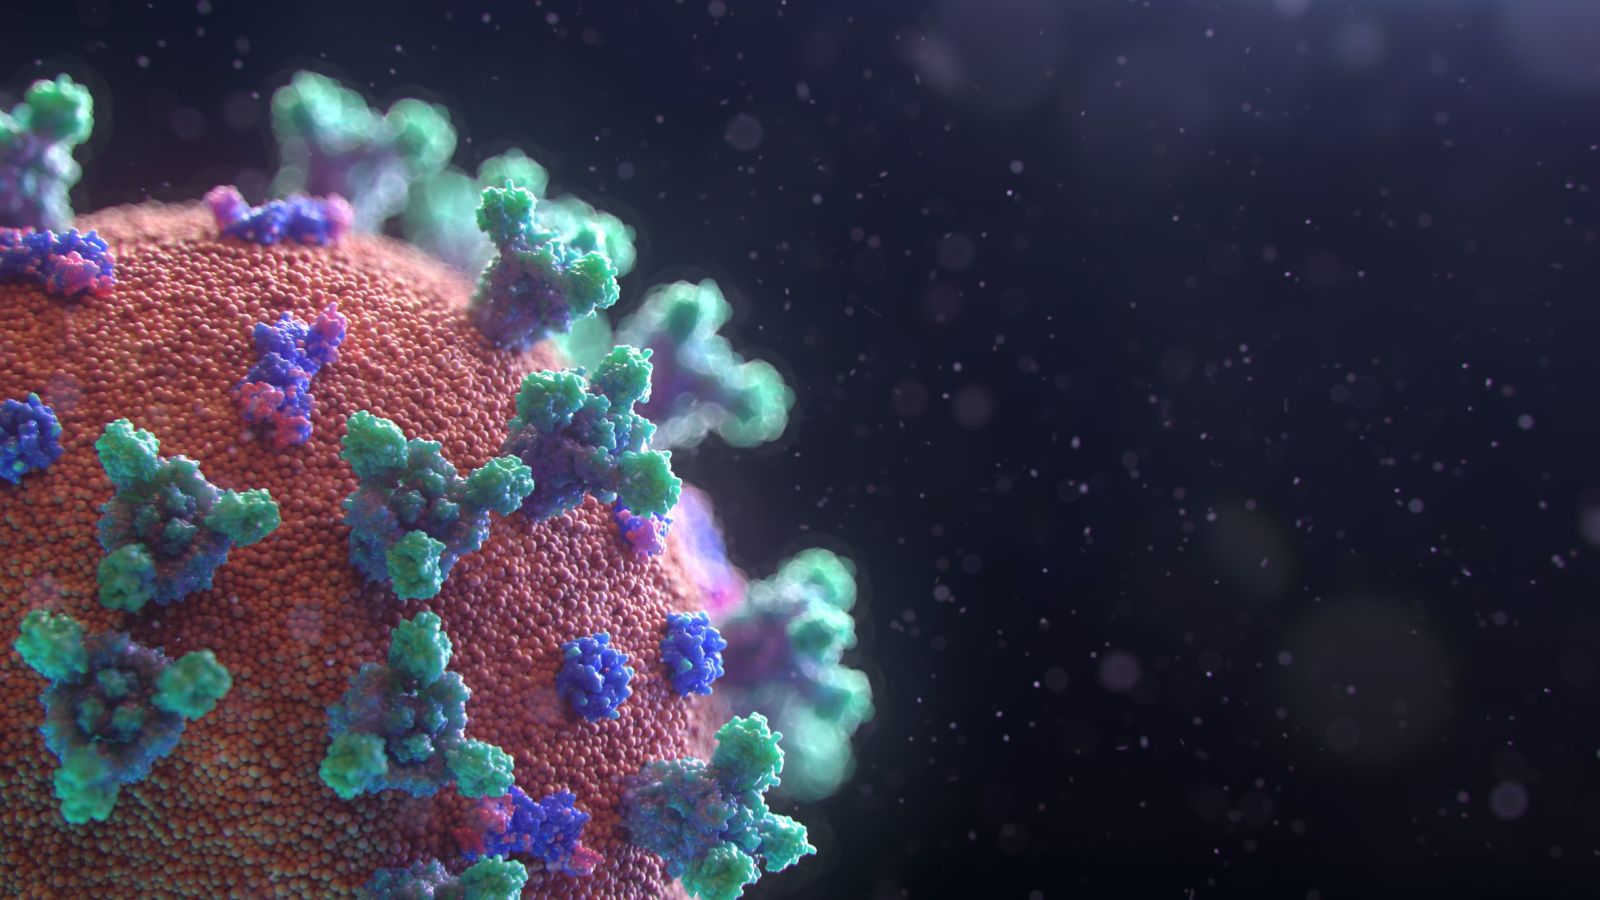 Close-up picture of a virus with colours red, blue, purple and green, and a black background – Photo credit: Fusion Medical Animation, Unsplash.